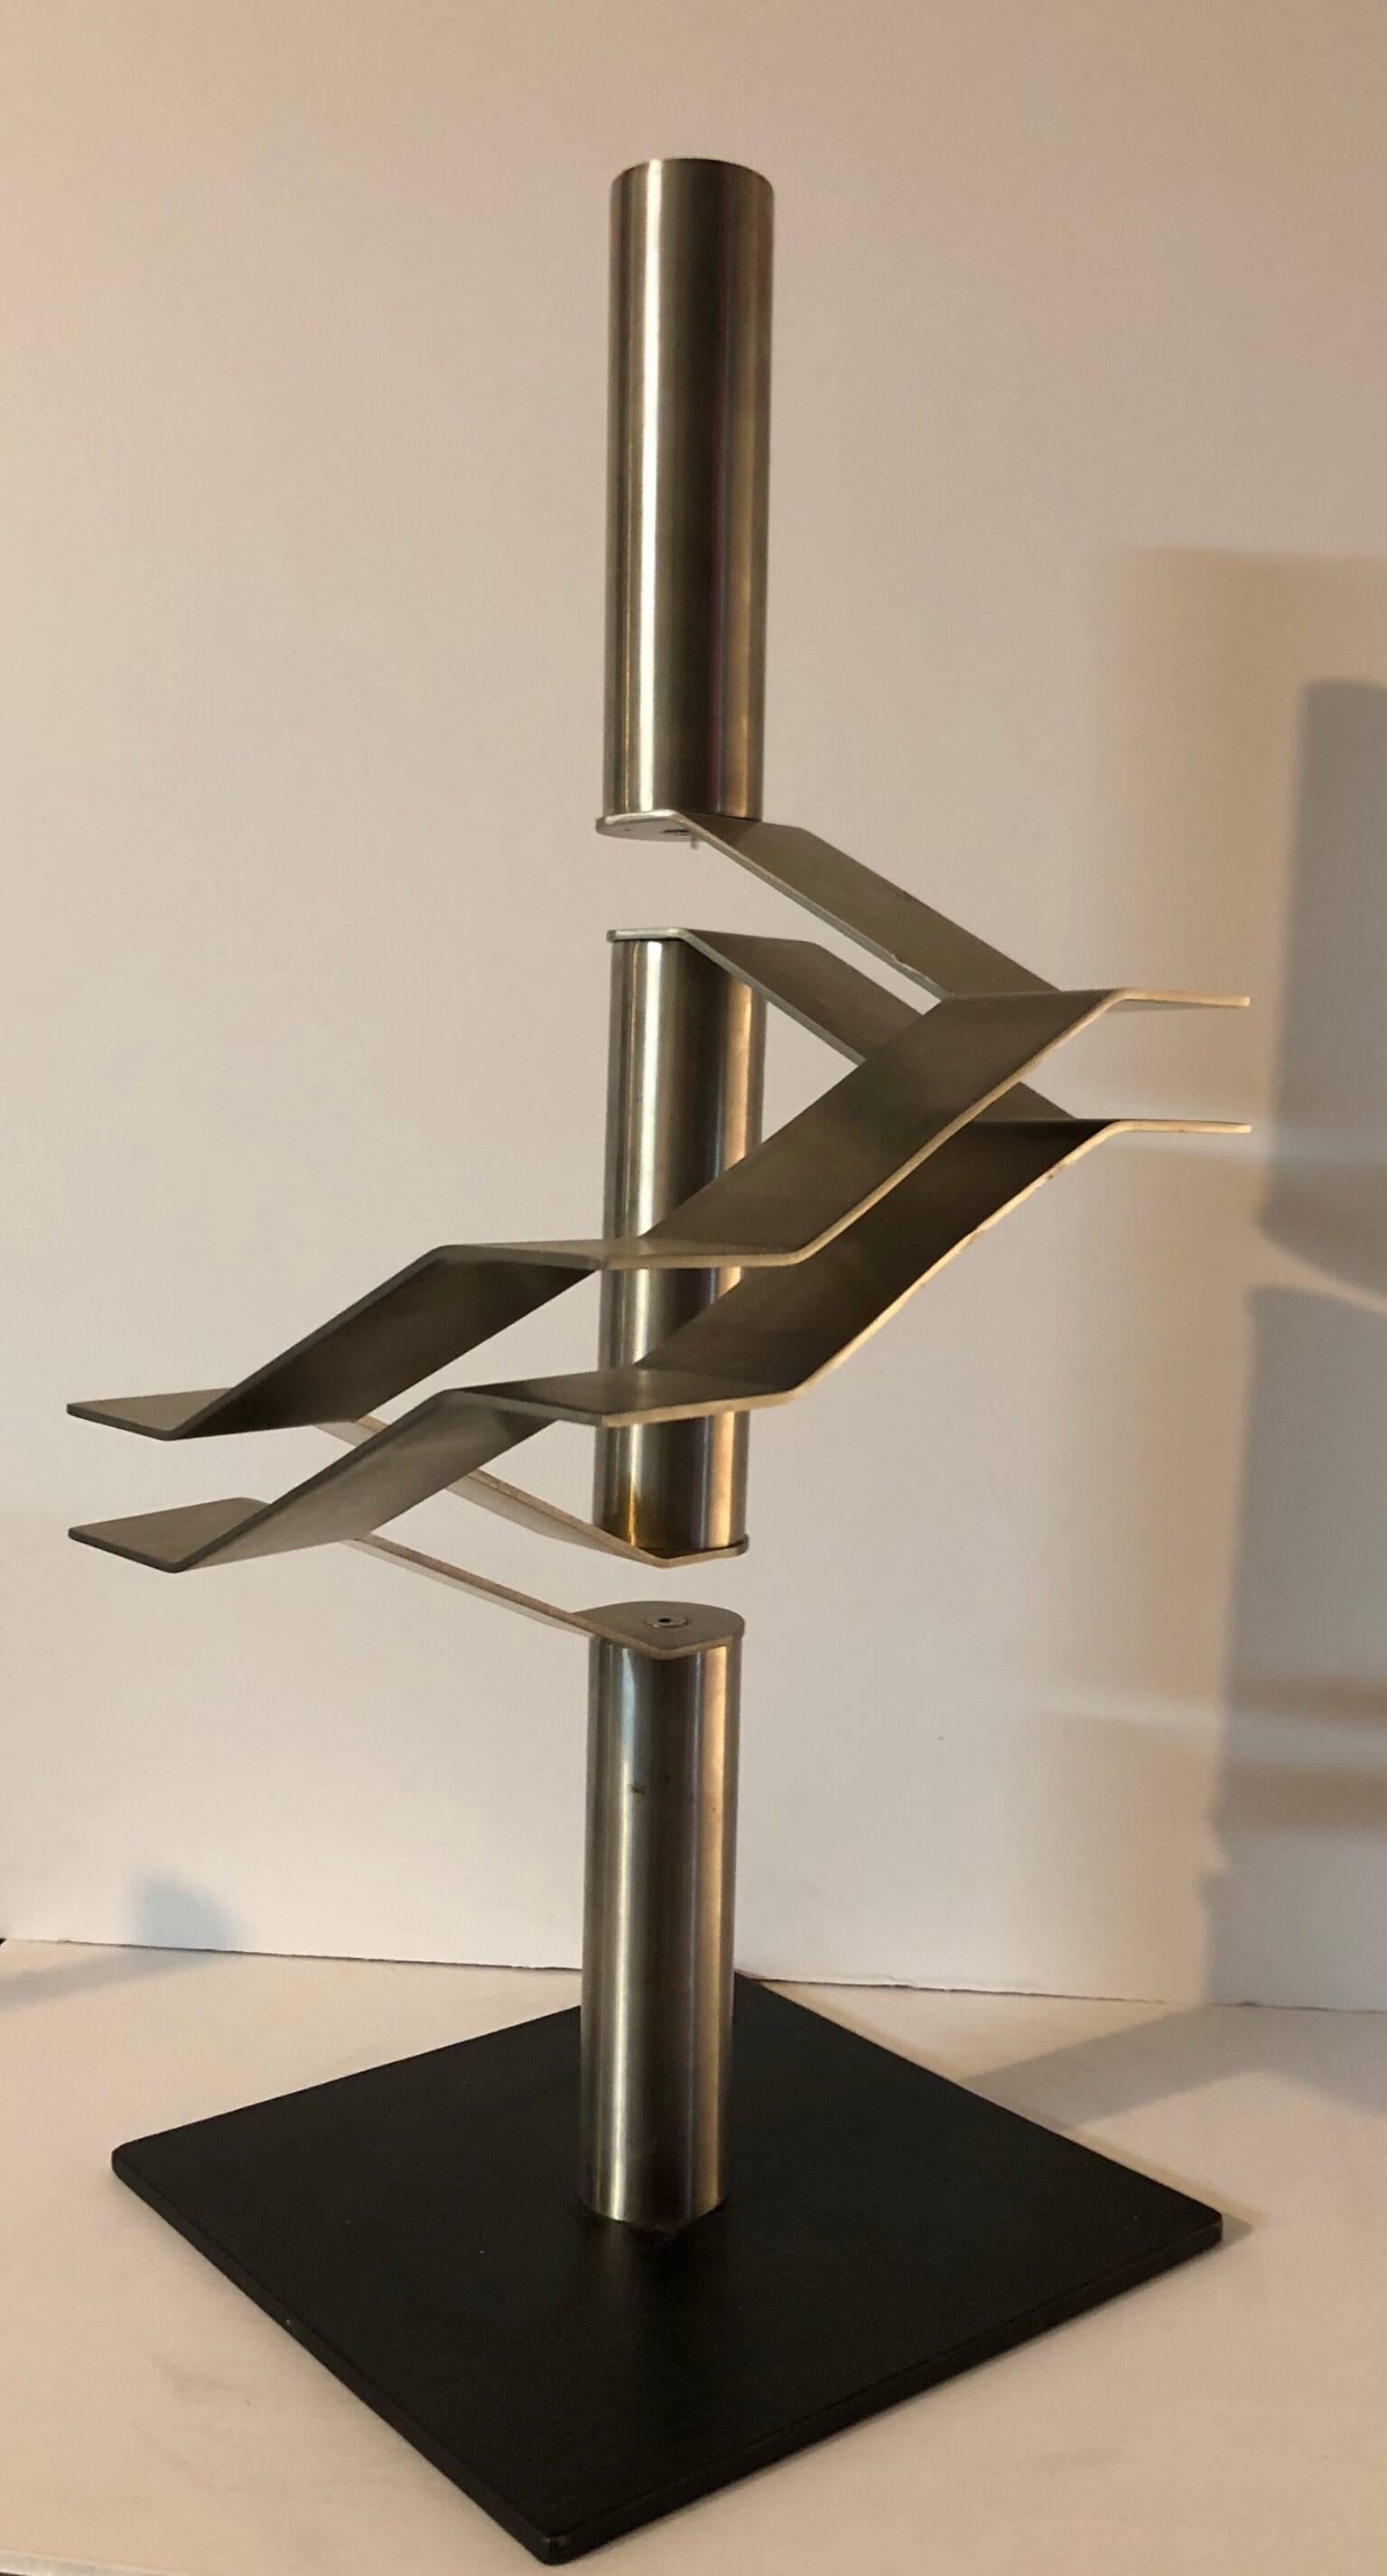 Israel Hadany Abstract Sculpture - Large Stainless Steel Abstract Israeli Sculpture 'Three Tubes' Maquette